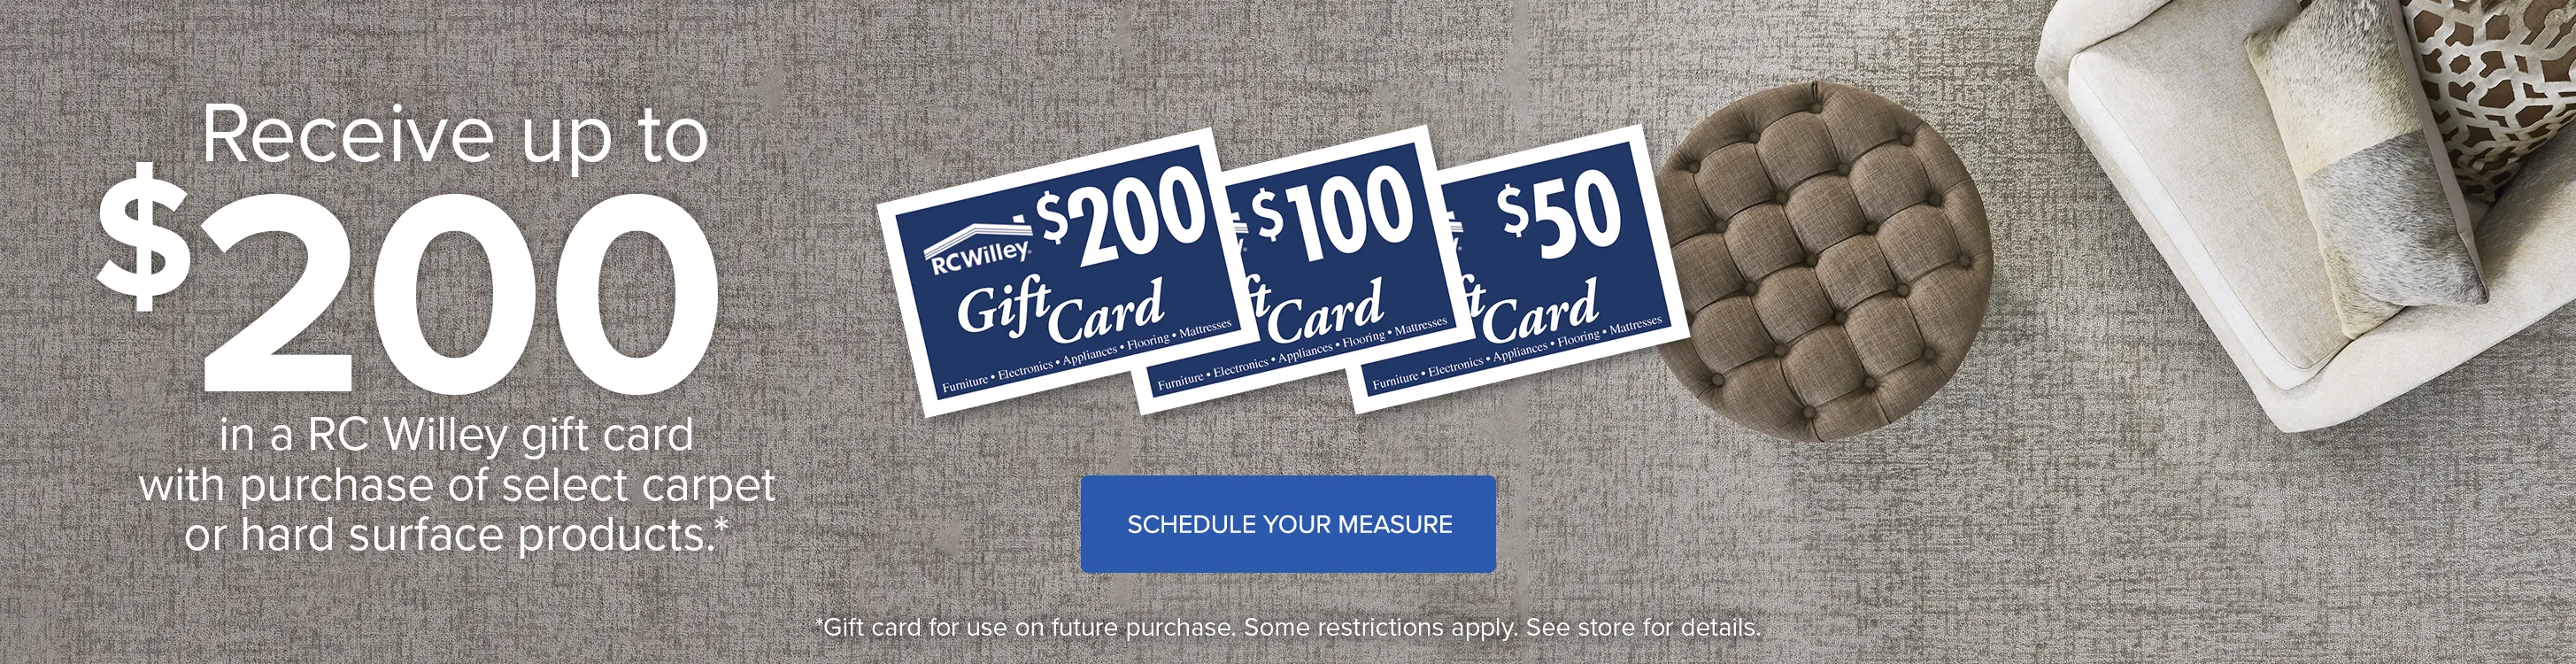 Get $200 in an RC Willey Gift Card with purchase of select carpet or hard surface products. See store for details.